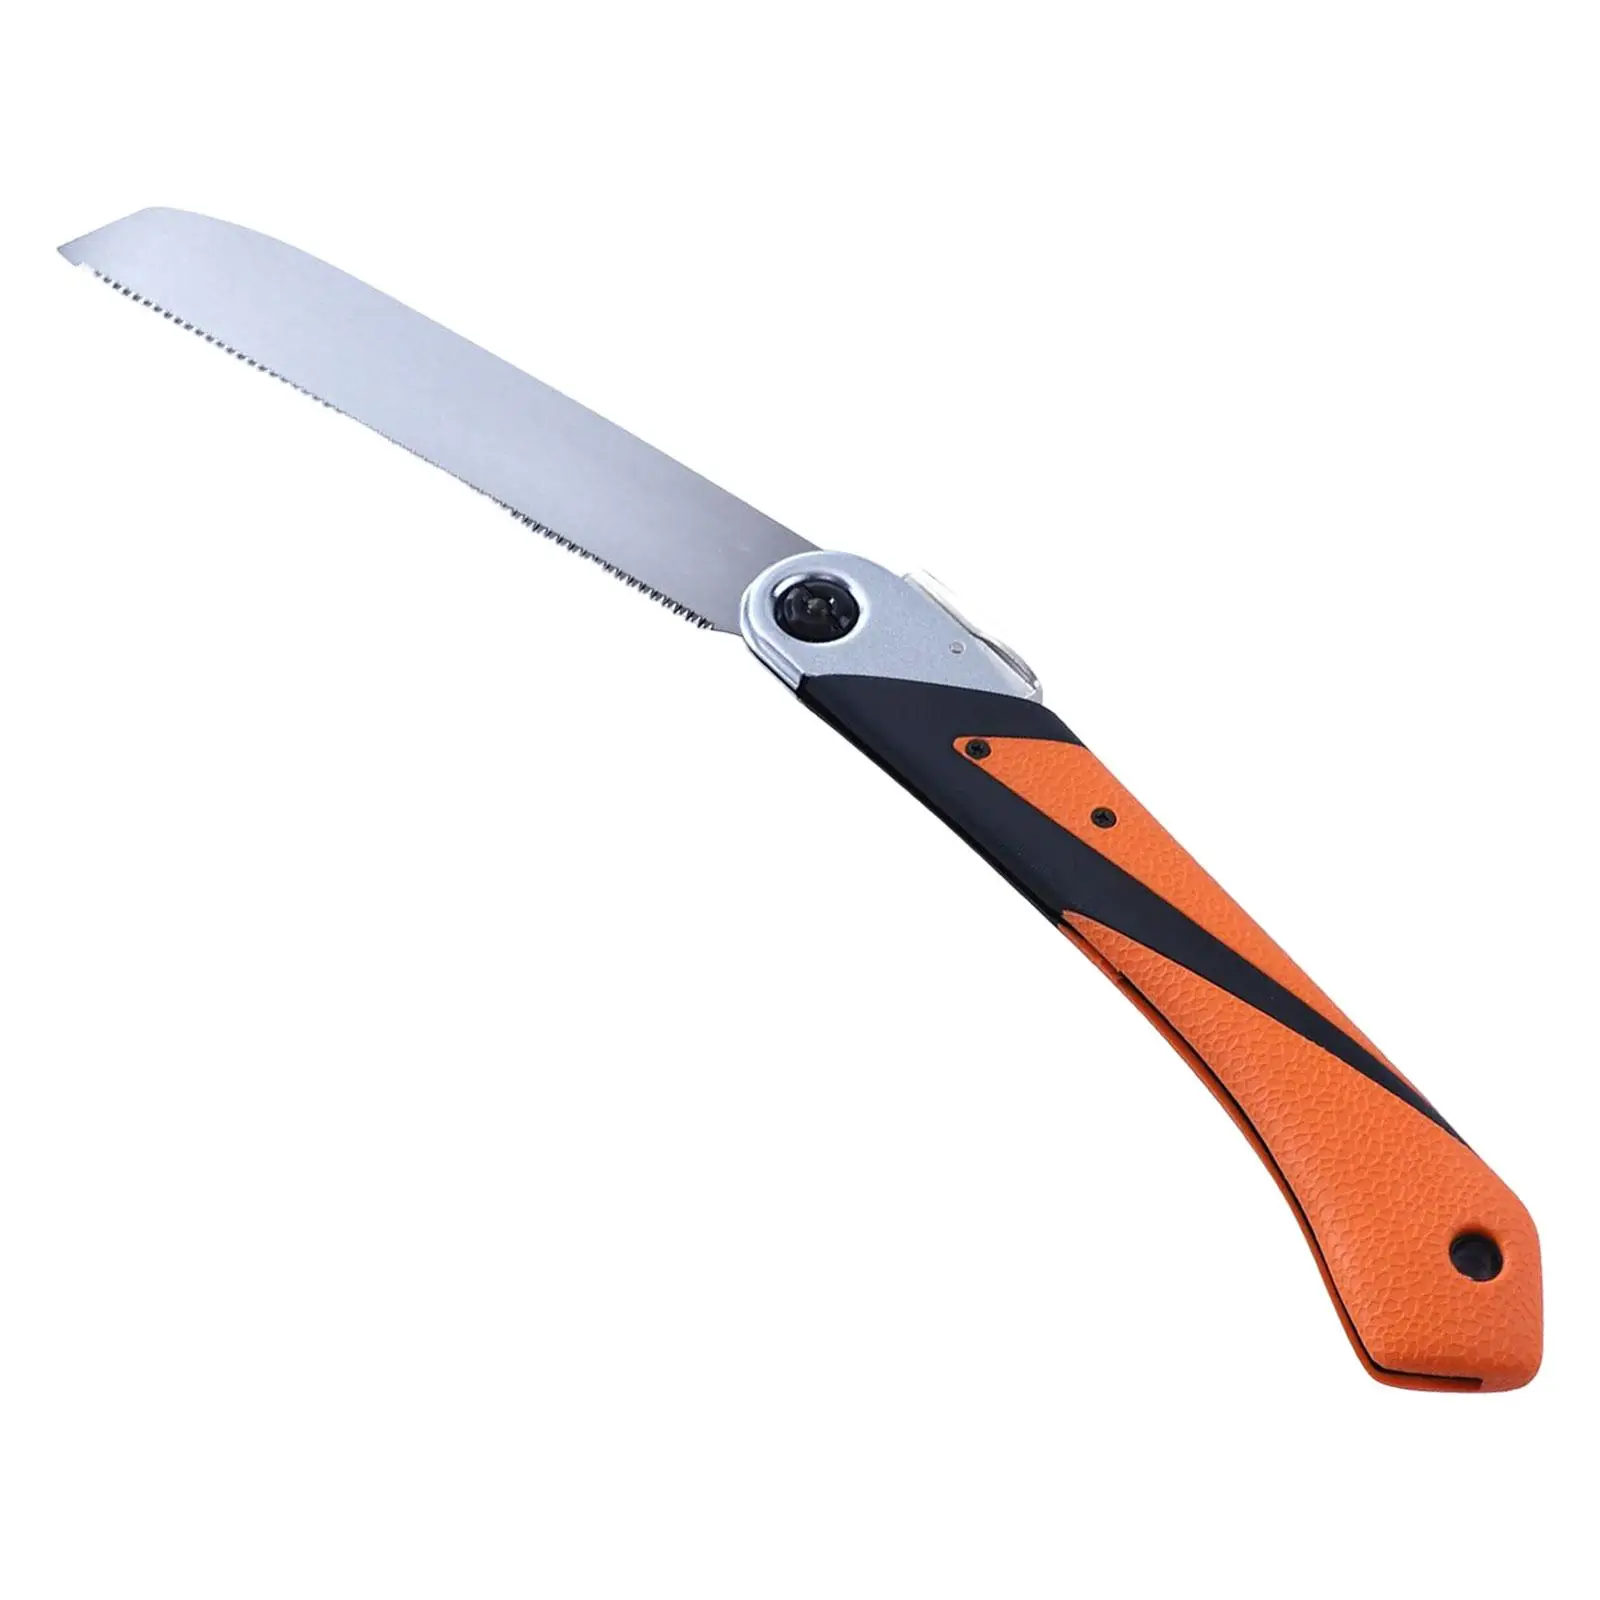 Portable Folding Saw Efficient Sawing Three Sided Grinding Saw Pruning Saw for Outdoor Activities Backpacking Garden Hiking